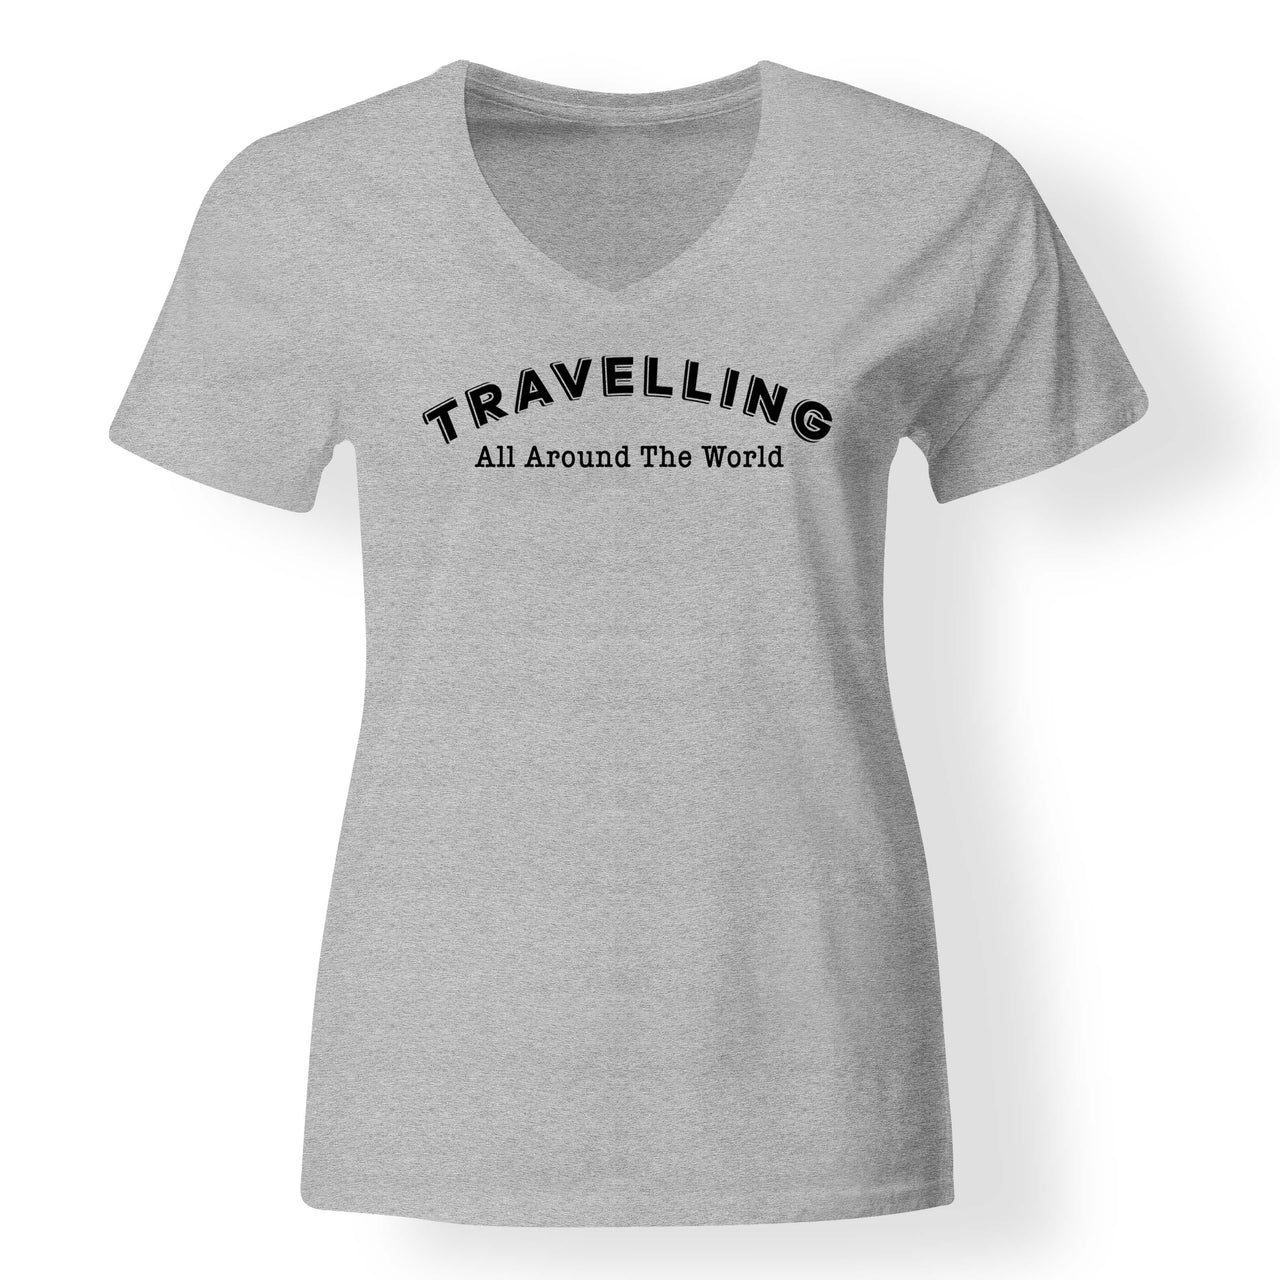 Travelling All Around The World Designed V-Neck T-Shirts